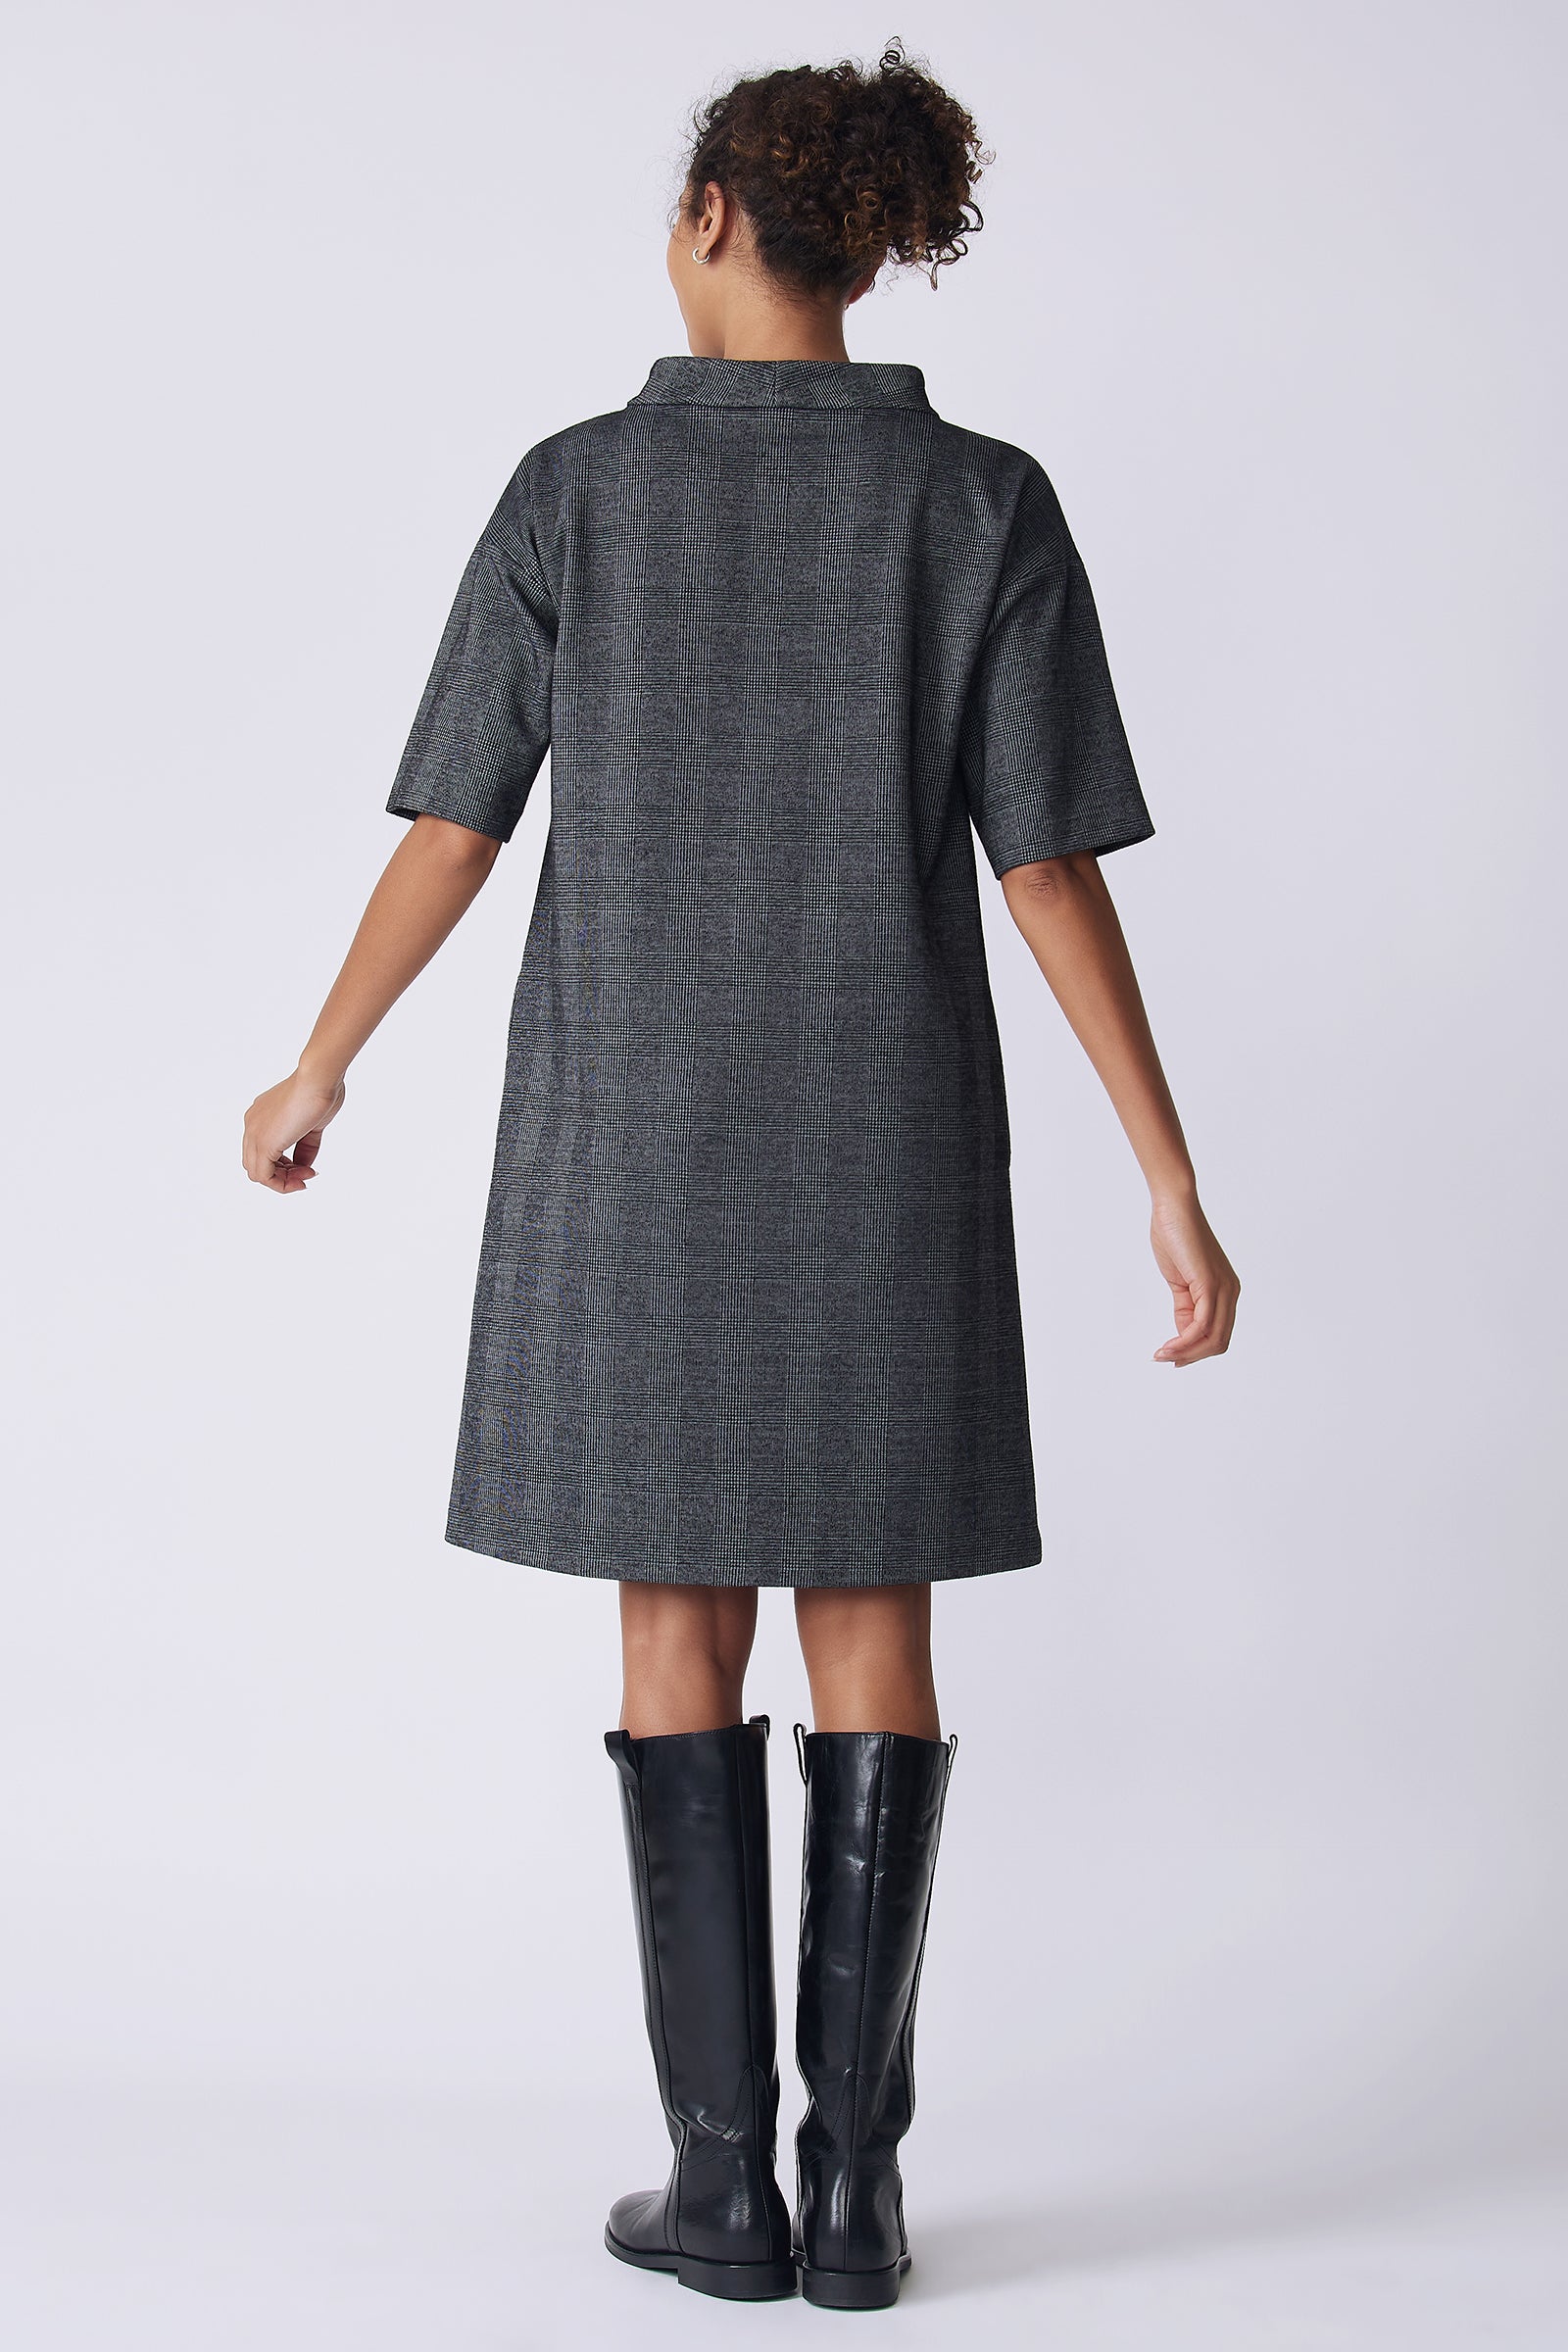 Kal Rieman Avery Dress in black plaid on model front view hands in pockets